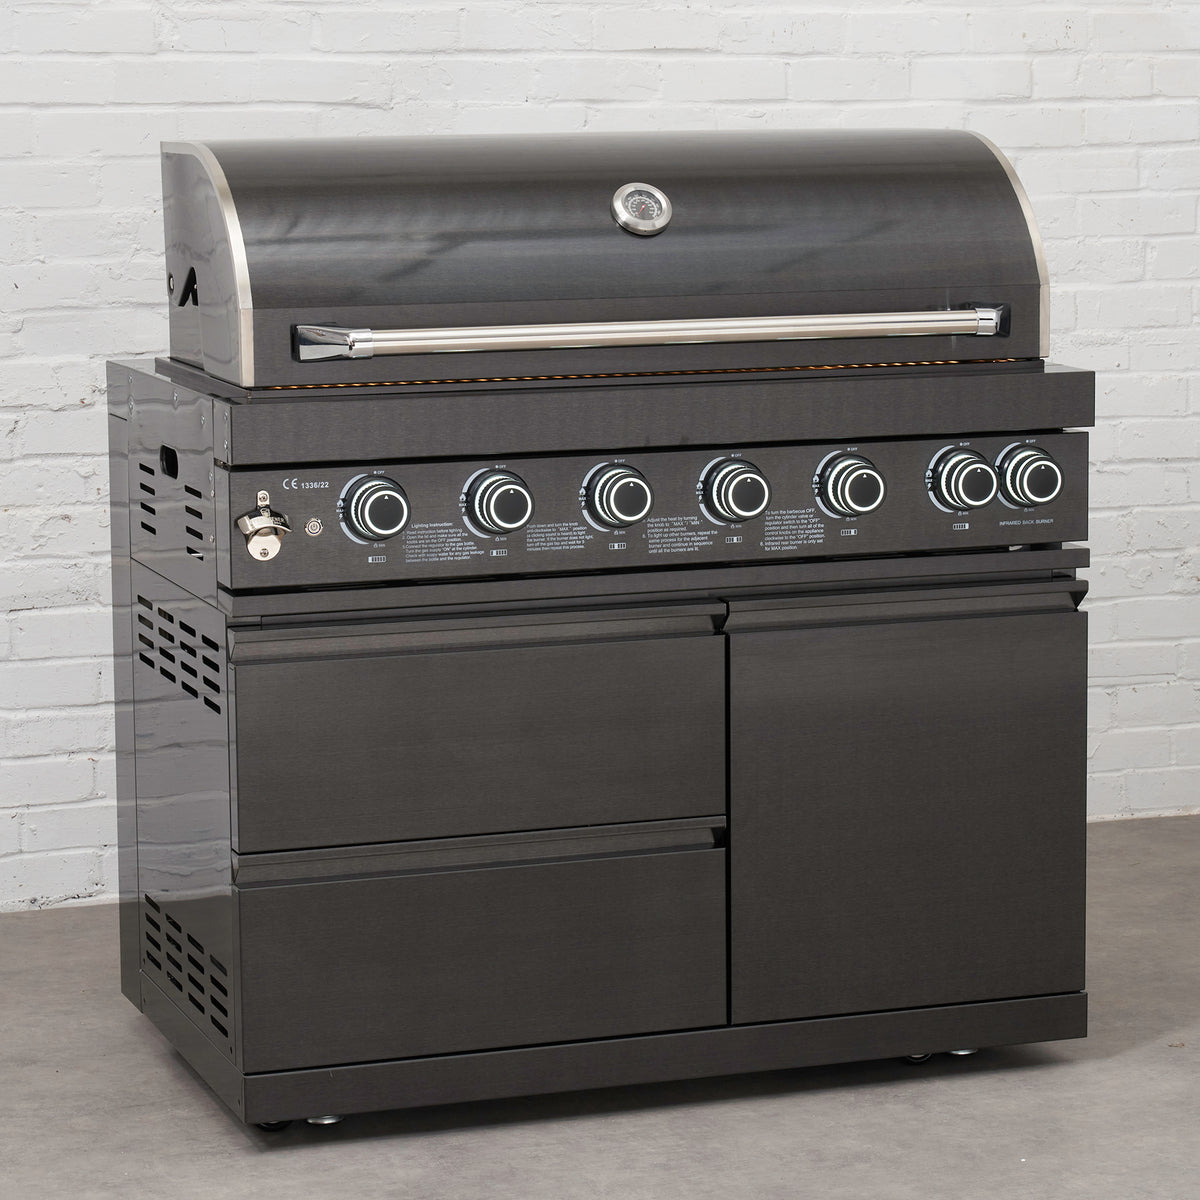 Draco Grills 6 Burner BBQ Black Stainless Steel Modular Outdoor Kitchen with Triple Drawer and Fridge and Sink Unit